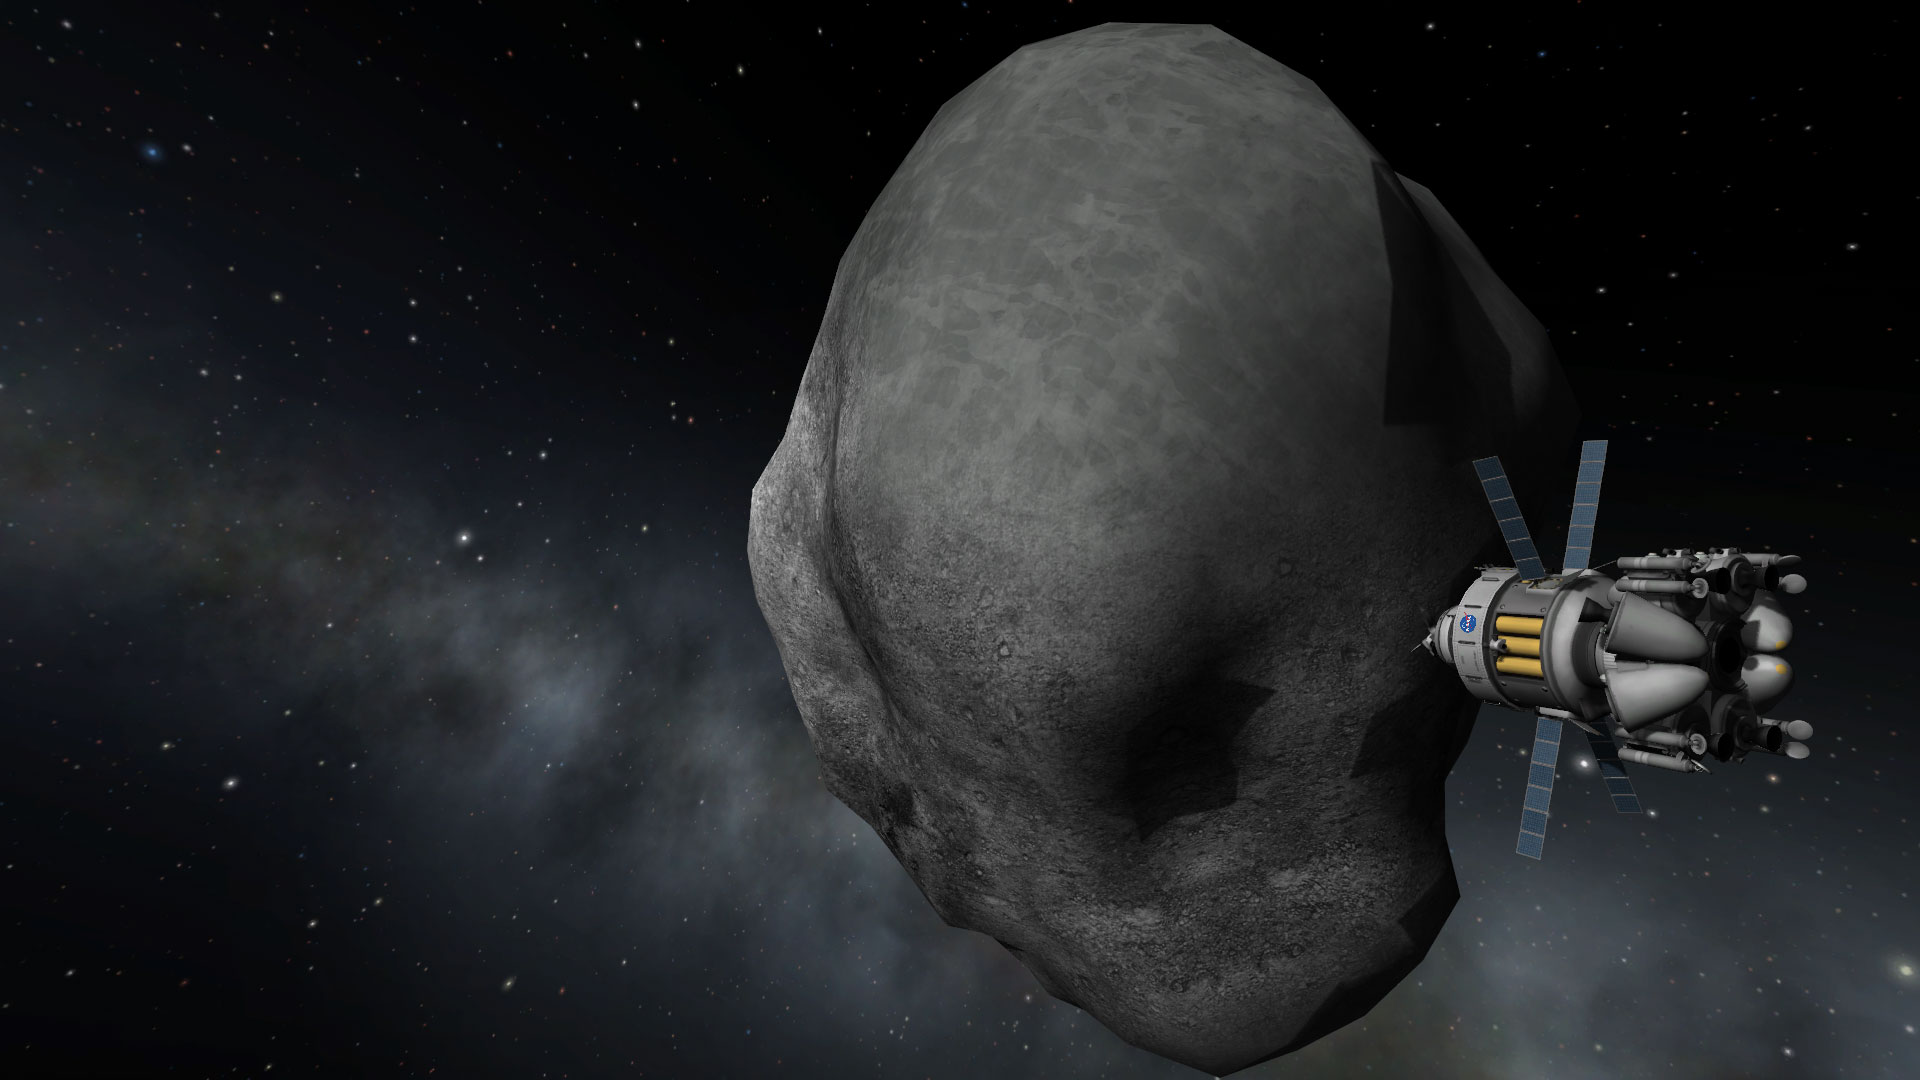 Squad, the creators of KSP, and NASA partnered to bring the Asteroid Redirect Mission into the game. Credit: Squad, Monkey Squad S.A de C.V.